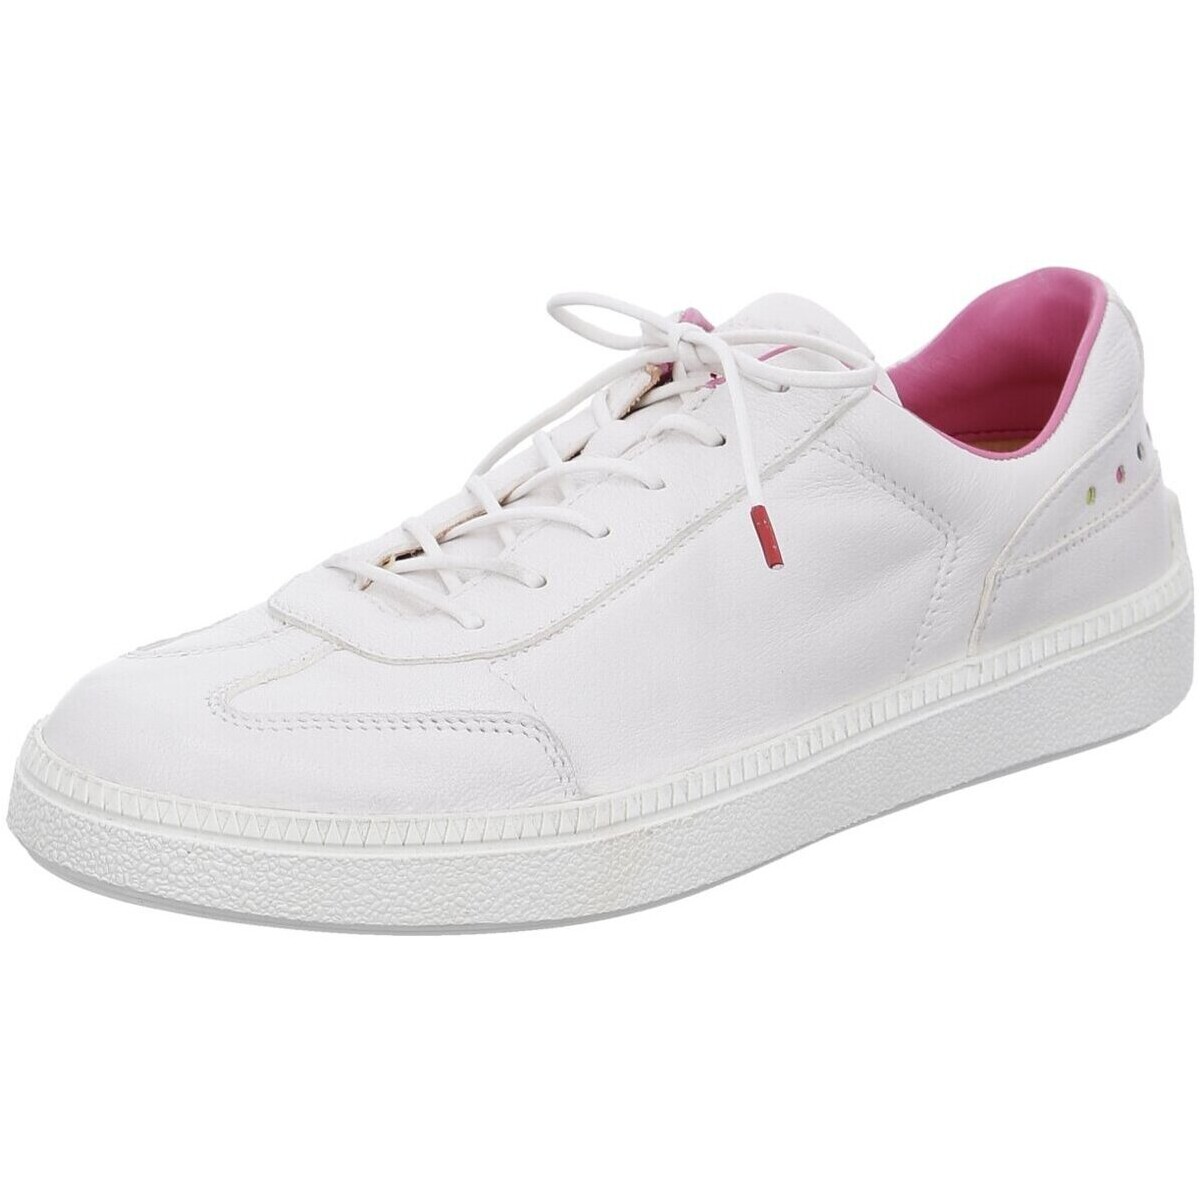 Chaussures Femme Coco & Abricot  Blanc